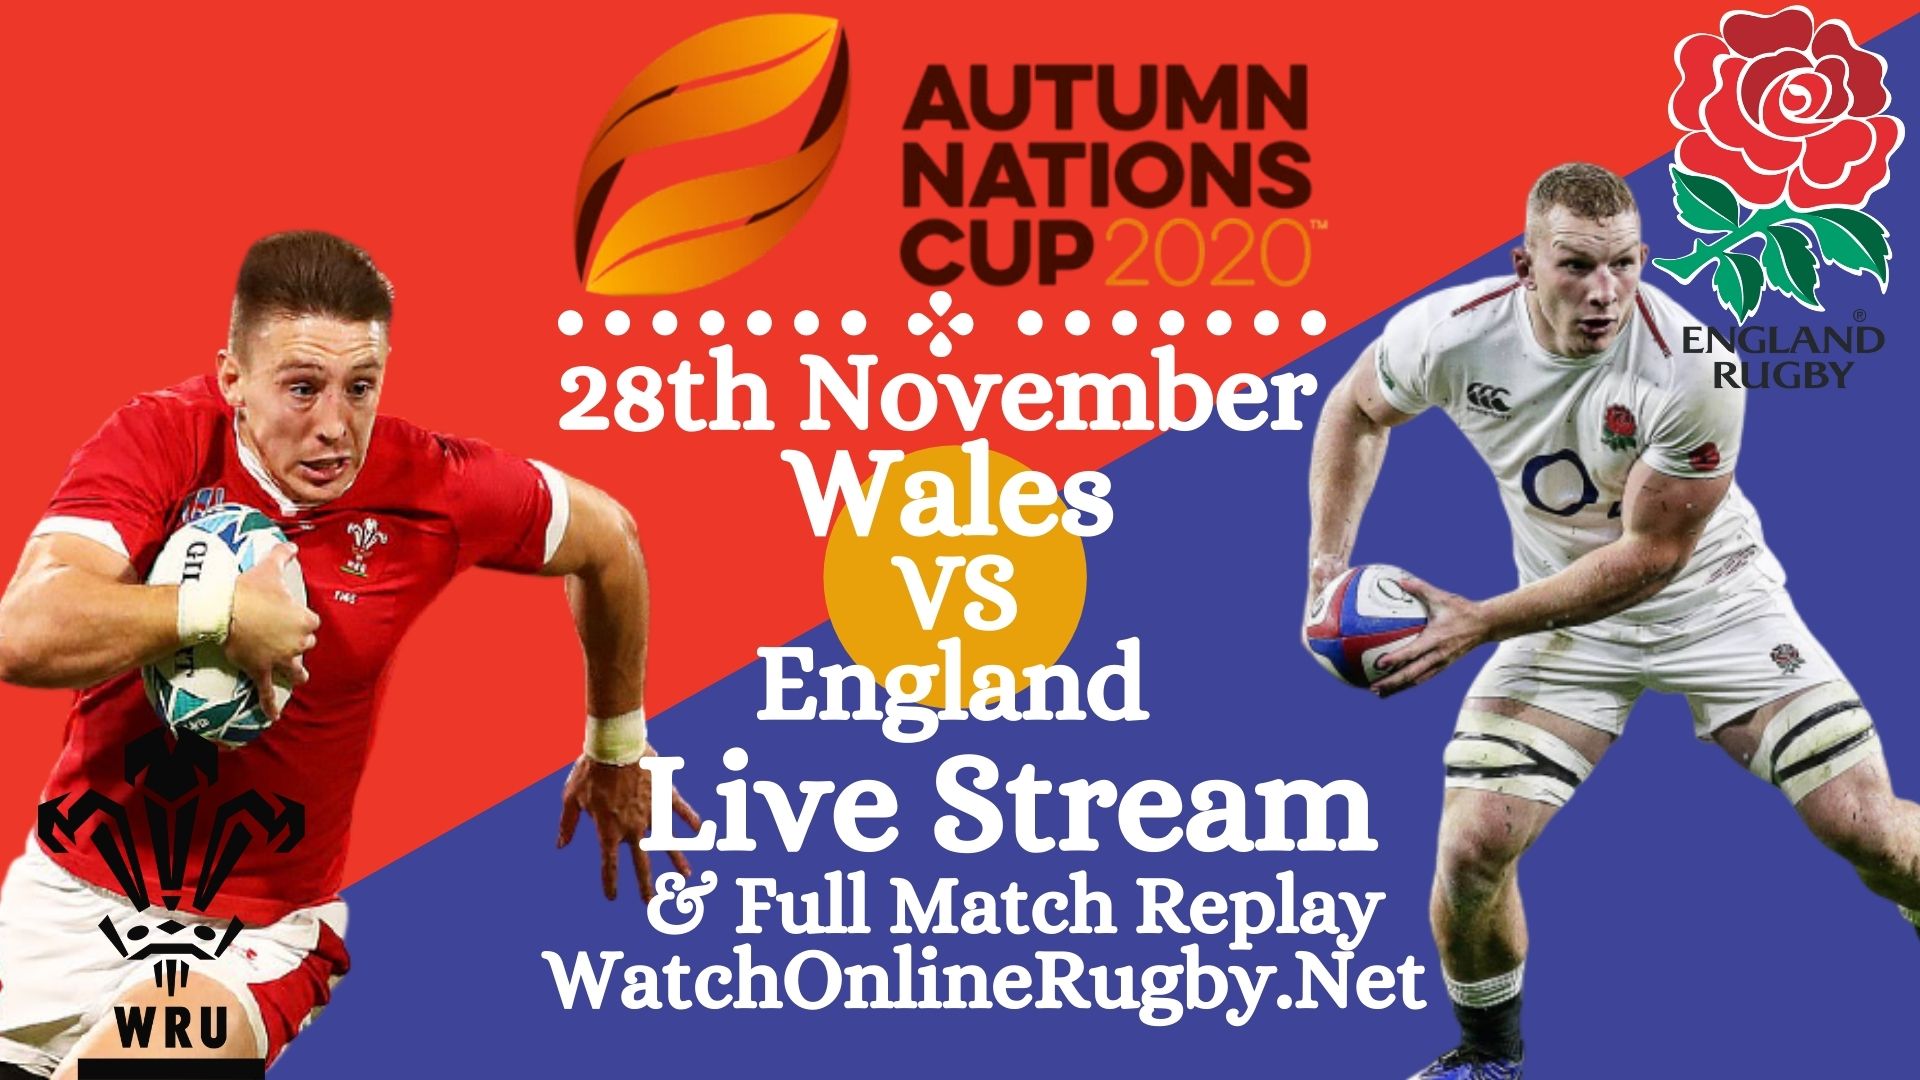 Wales Vs England Autumn Nations Cup 2020